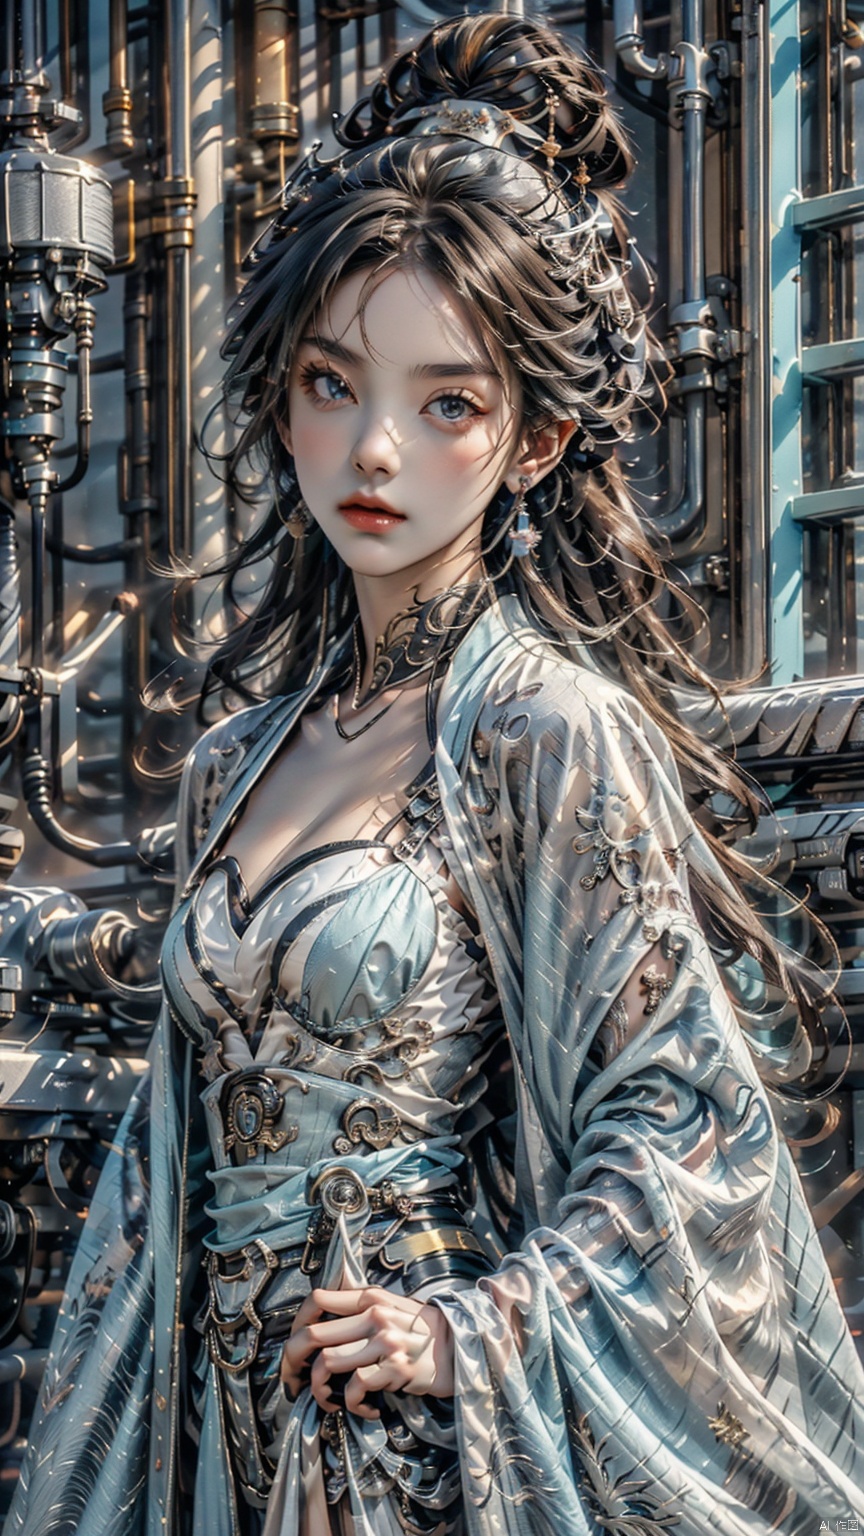 Girl, solo, female focus, (Hanfu) (kimono) (skin), long hair, (future technology), (color coating) (machinery), (cell color) (promotion) Red lips, bands, ears, kimono, Chinese cardigan, print, tassel, (face) (positive light),
Element whitewind, Chinese dragon_ Imagination__ Cloud_ Fire cloud_ Dragon, Chinese architecture
(Masterpiece), (Very Detailed CG Unity 8K Wallpaper), Best Quality, High Resolution Illustrations, Amazing, Highres, (Best Lighting, Best Shading, A Very Refined and Beautiful), (Enhanced) ·, 1 girl, Light electronic style, 1 girl, shining, drakan_ Longpress_ Dragon crown_ Address, Chineseclothes, dress, chang, myinv, dofas, machinery, Light-electric style,long sleeves